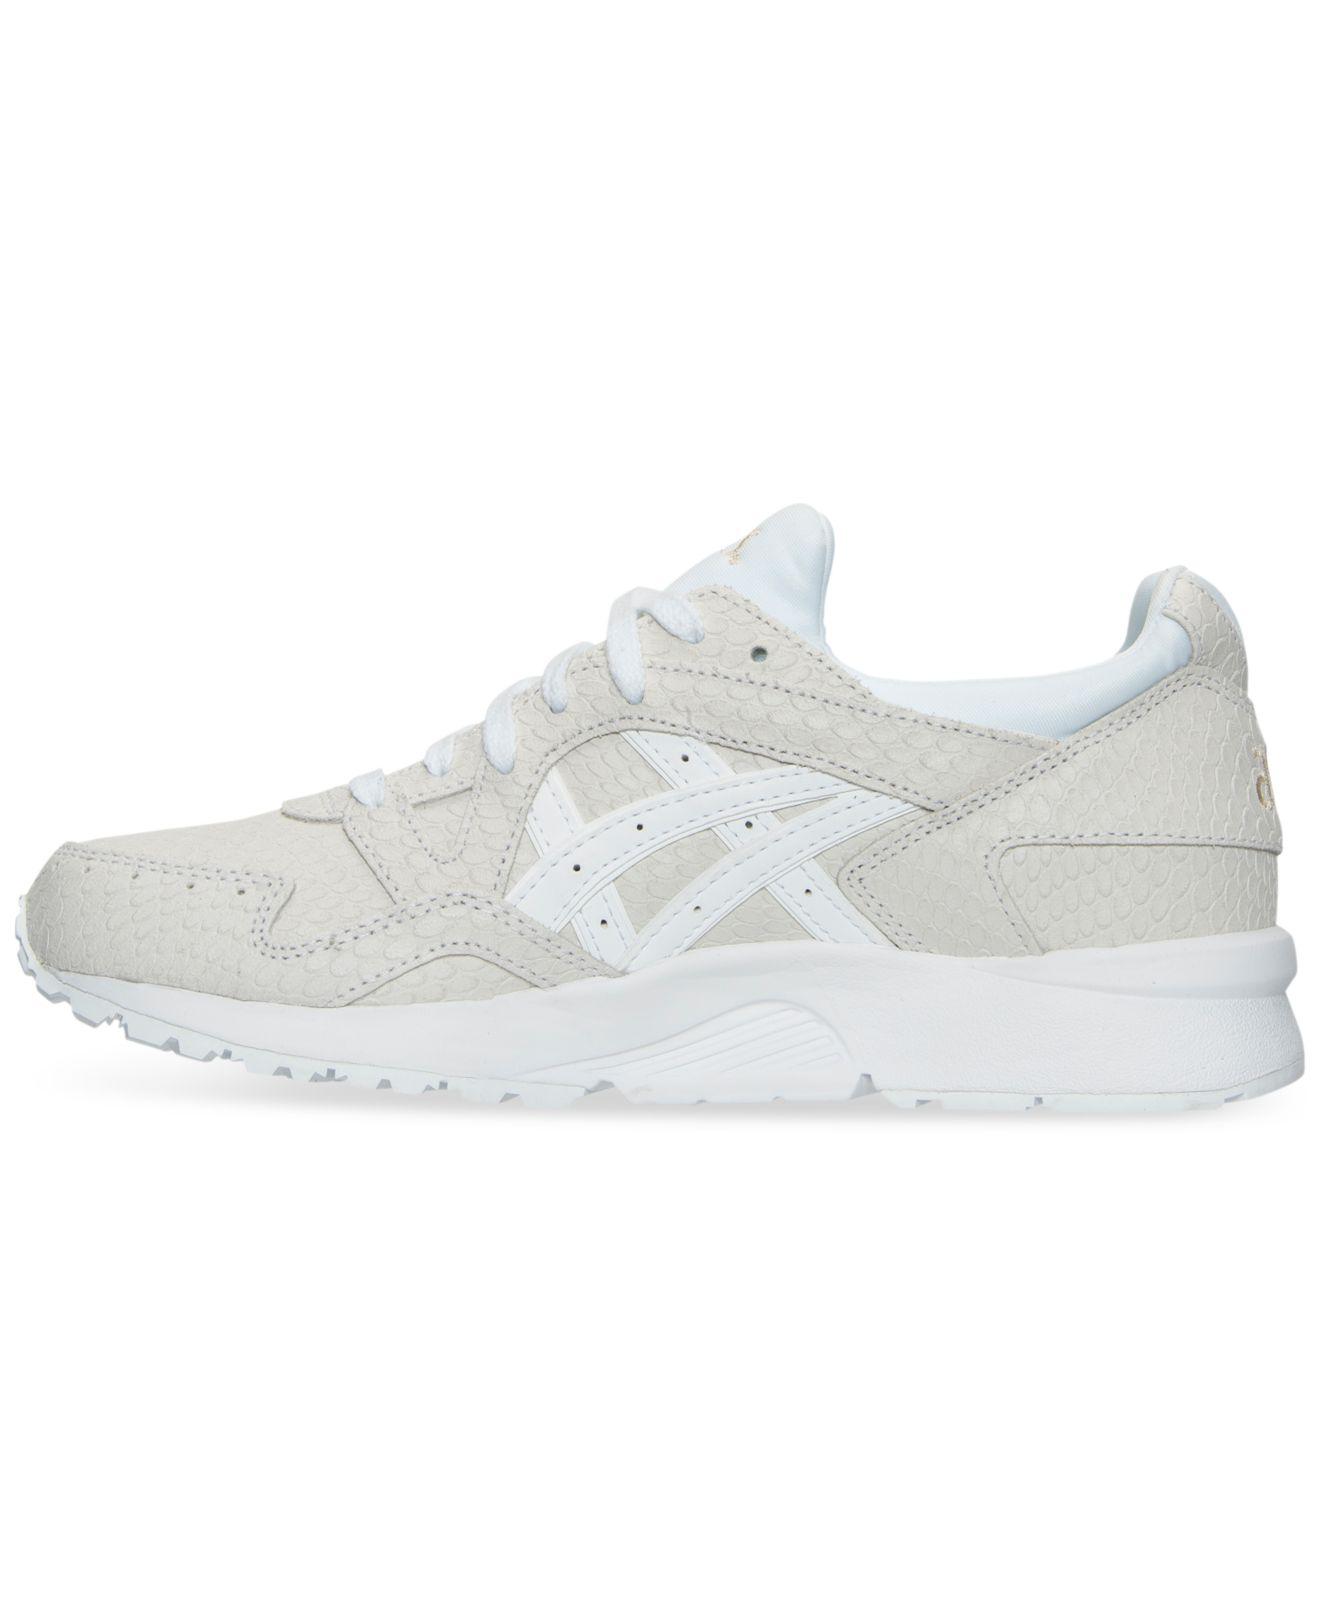 Asics Suede Women's Tiger Gellyte V Casual Sneakers From